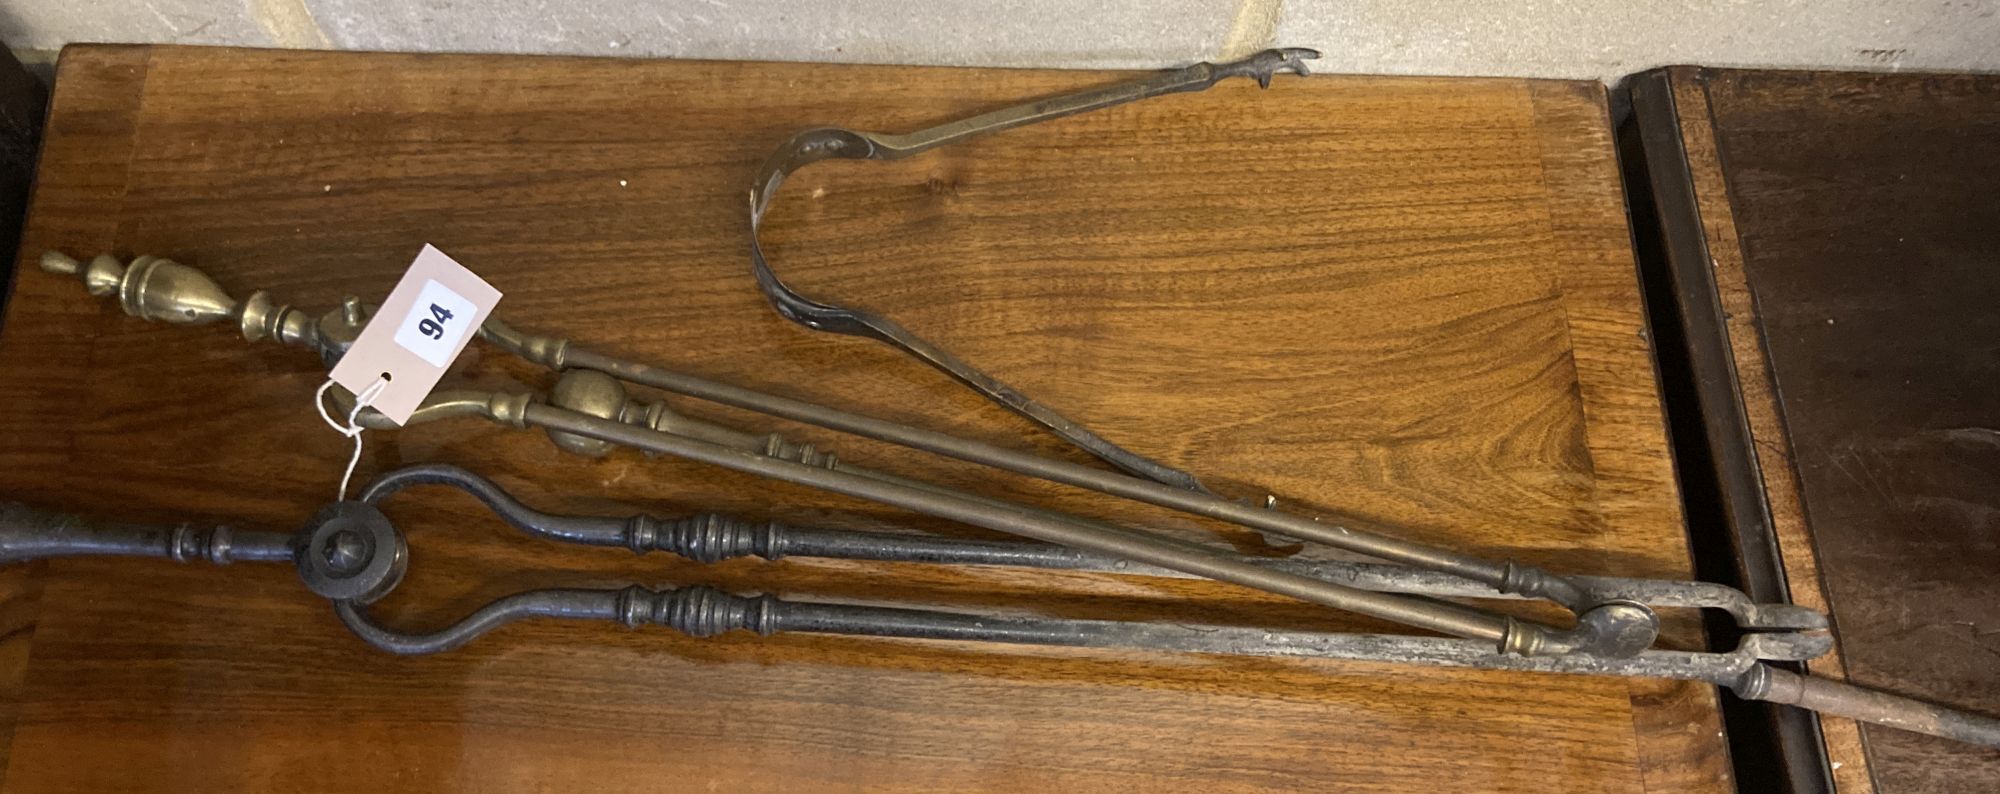 Four iron and brass fire implements